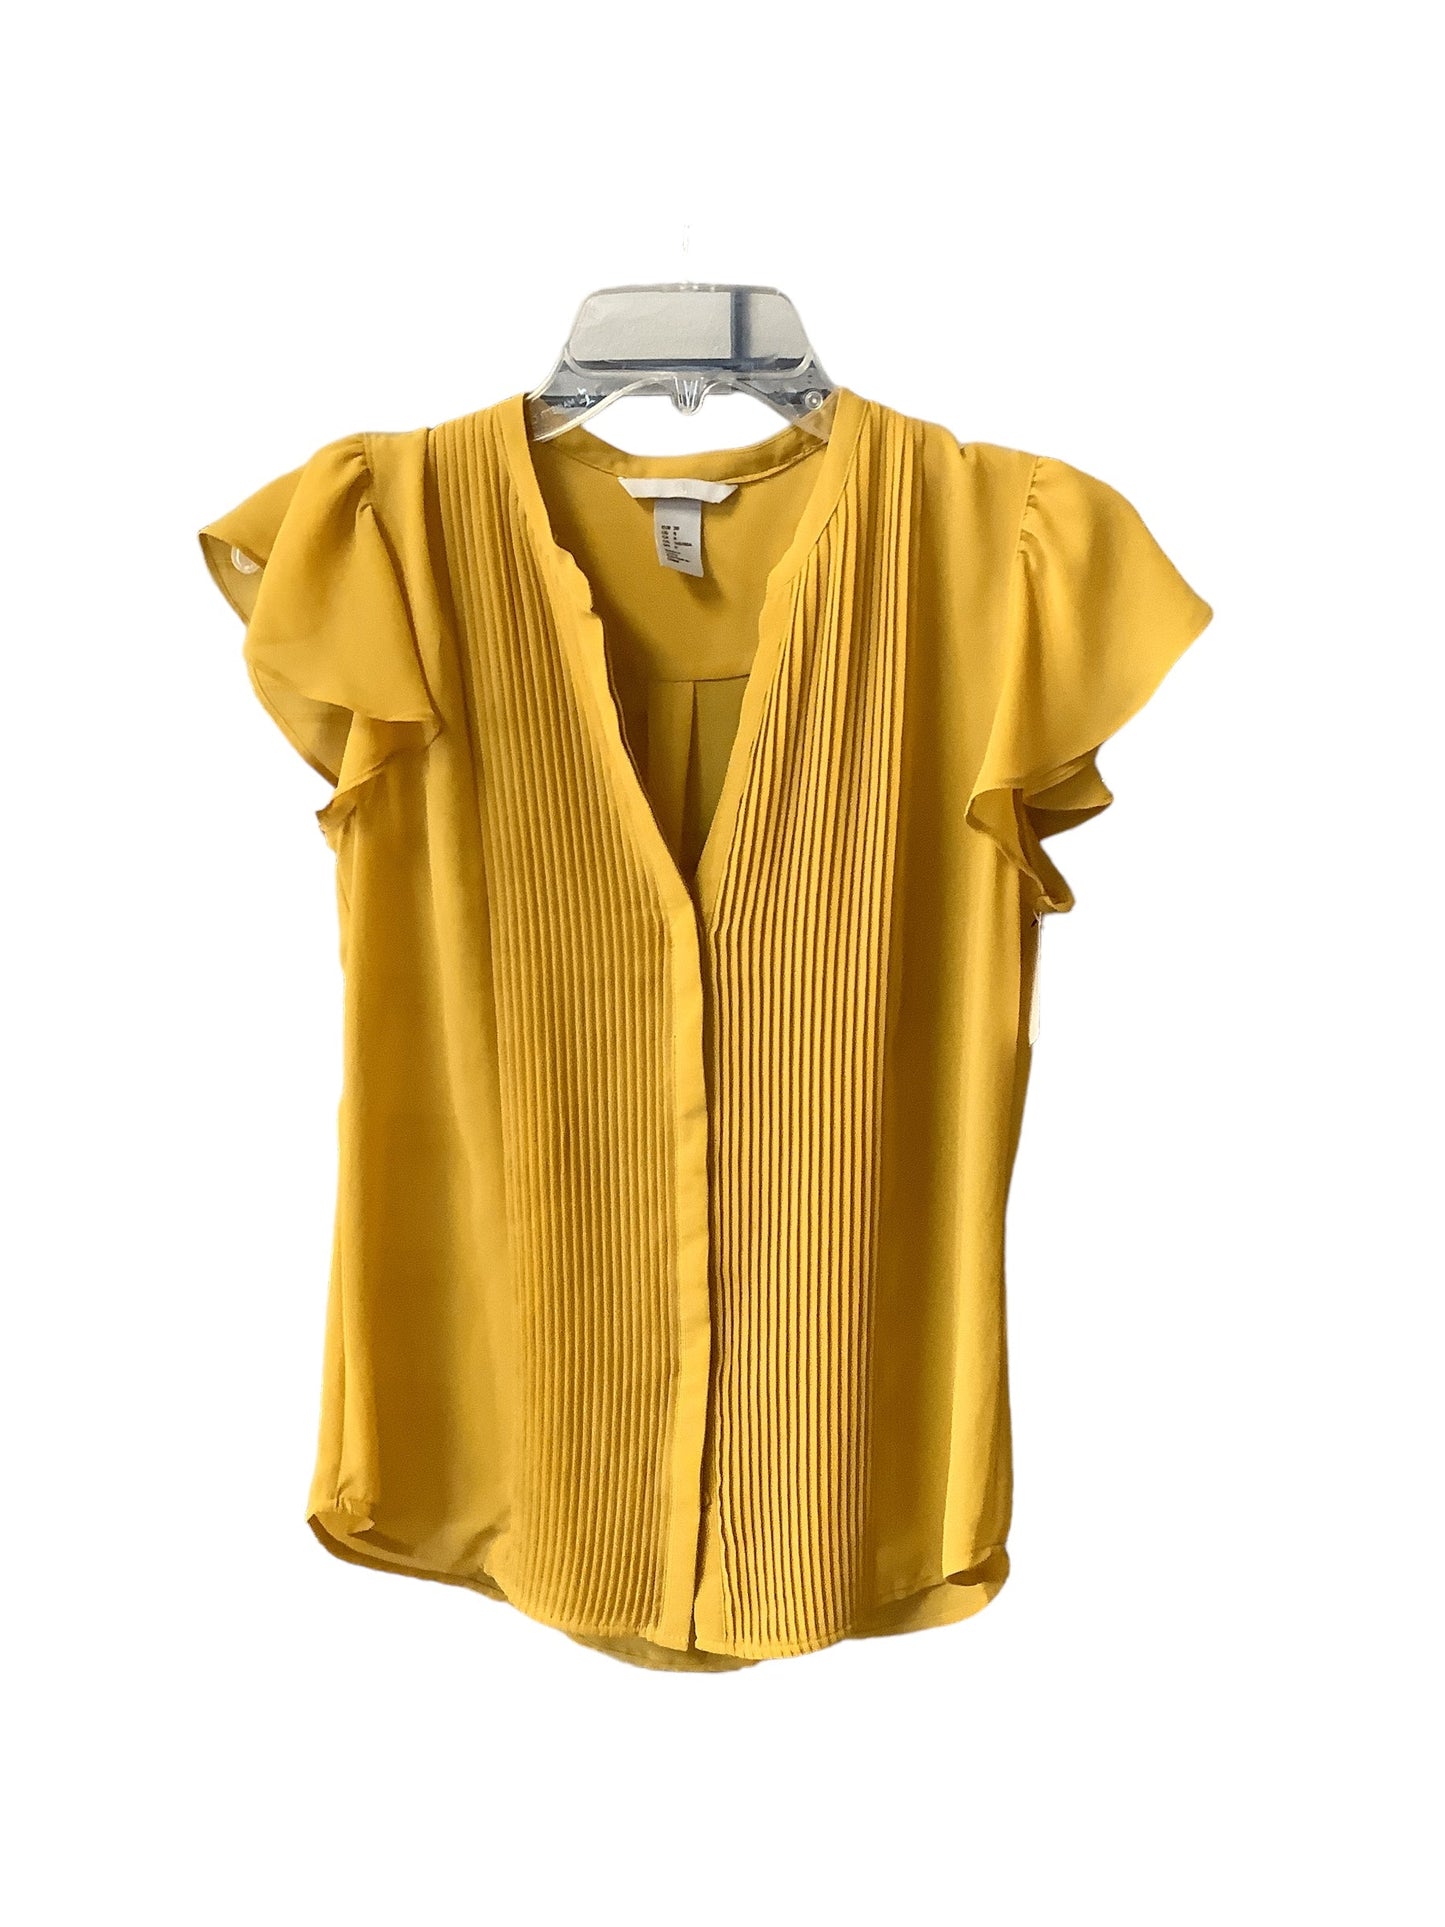 Yellow Top Short Sleeve H&m, Size 8